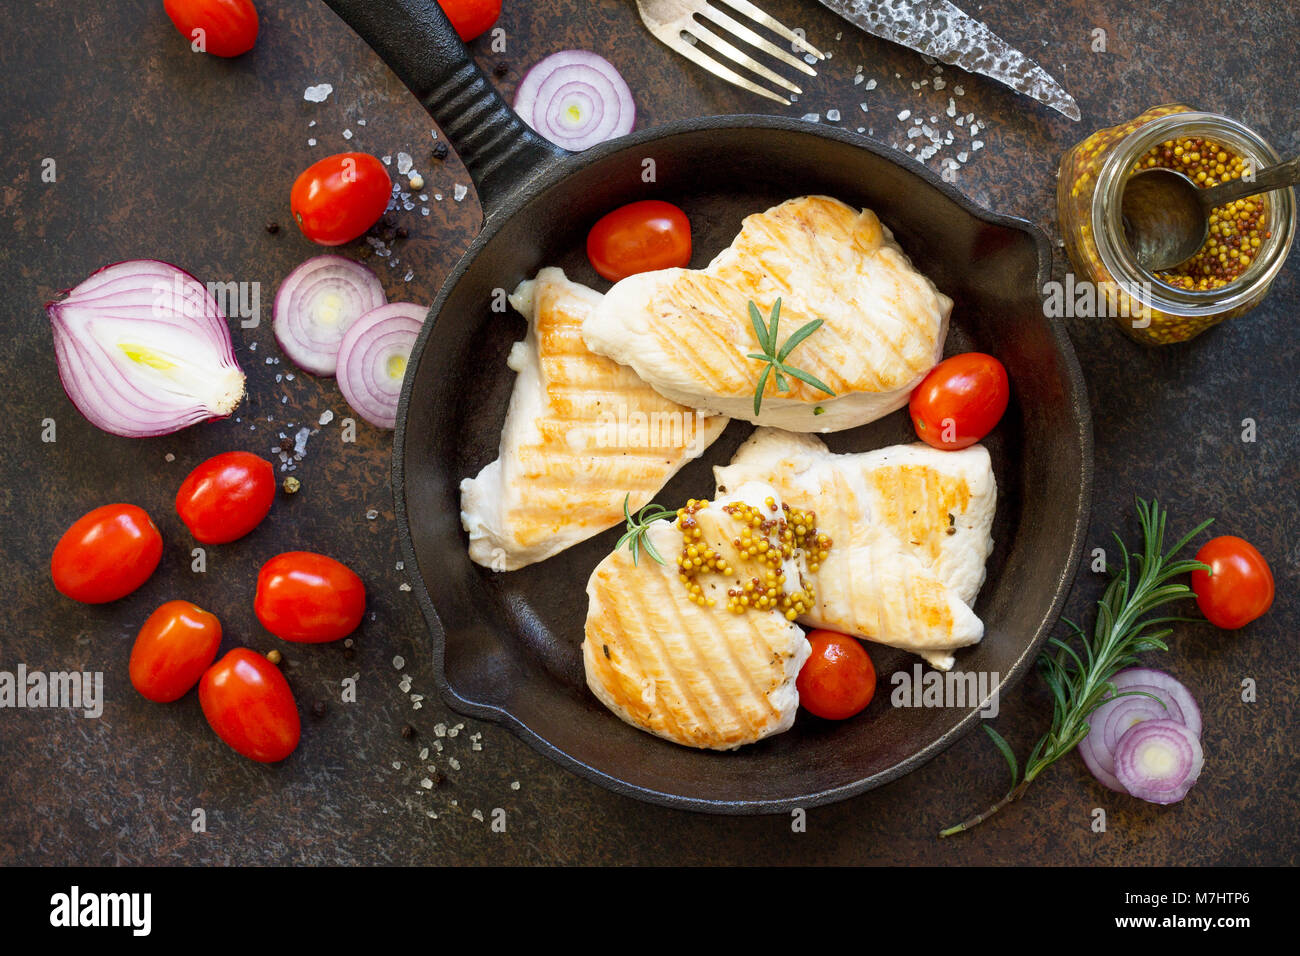 Grilled chicken fillet and various vegetables on a cast-iron frying pan. Copy space, top view flat lay background. Stock Photo